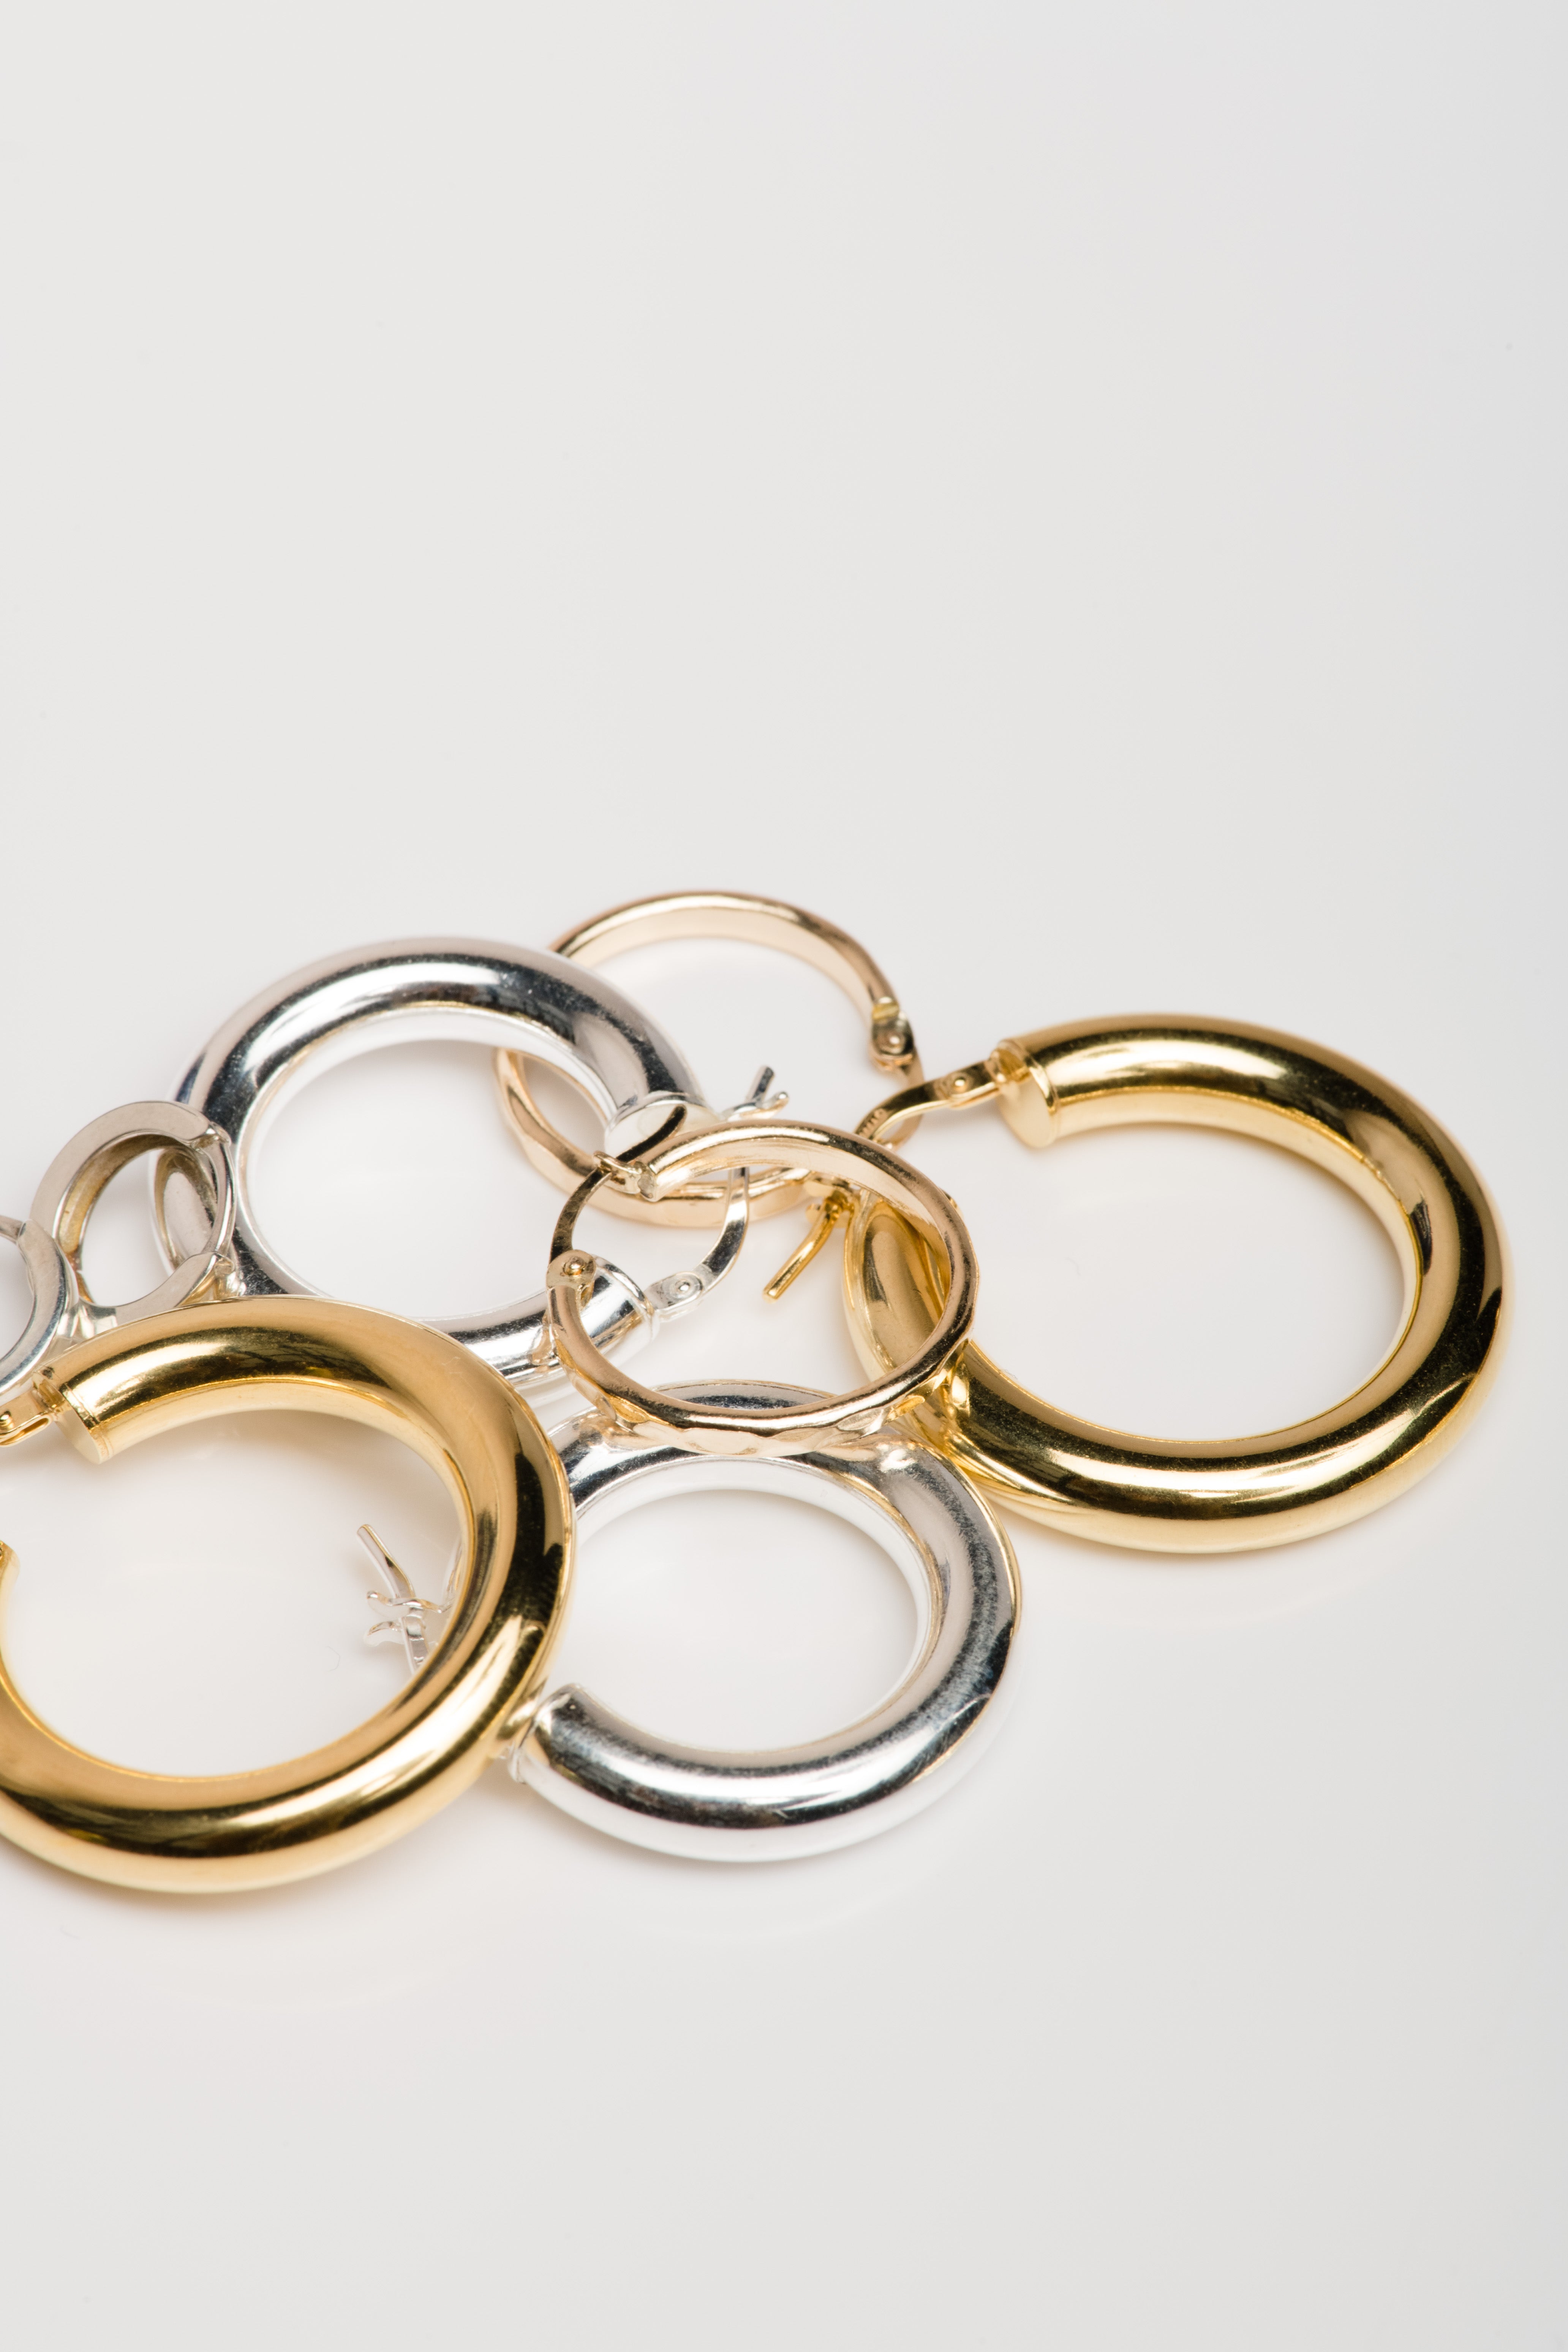 Silver and gold hoop earrings on a white background.